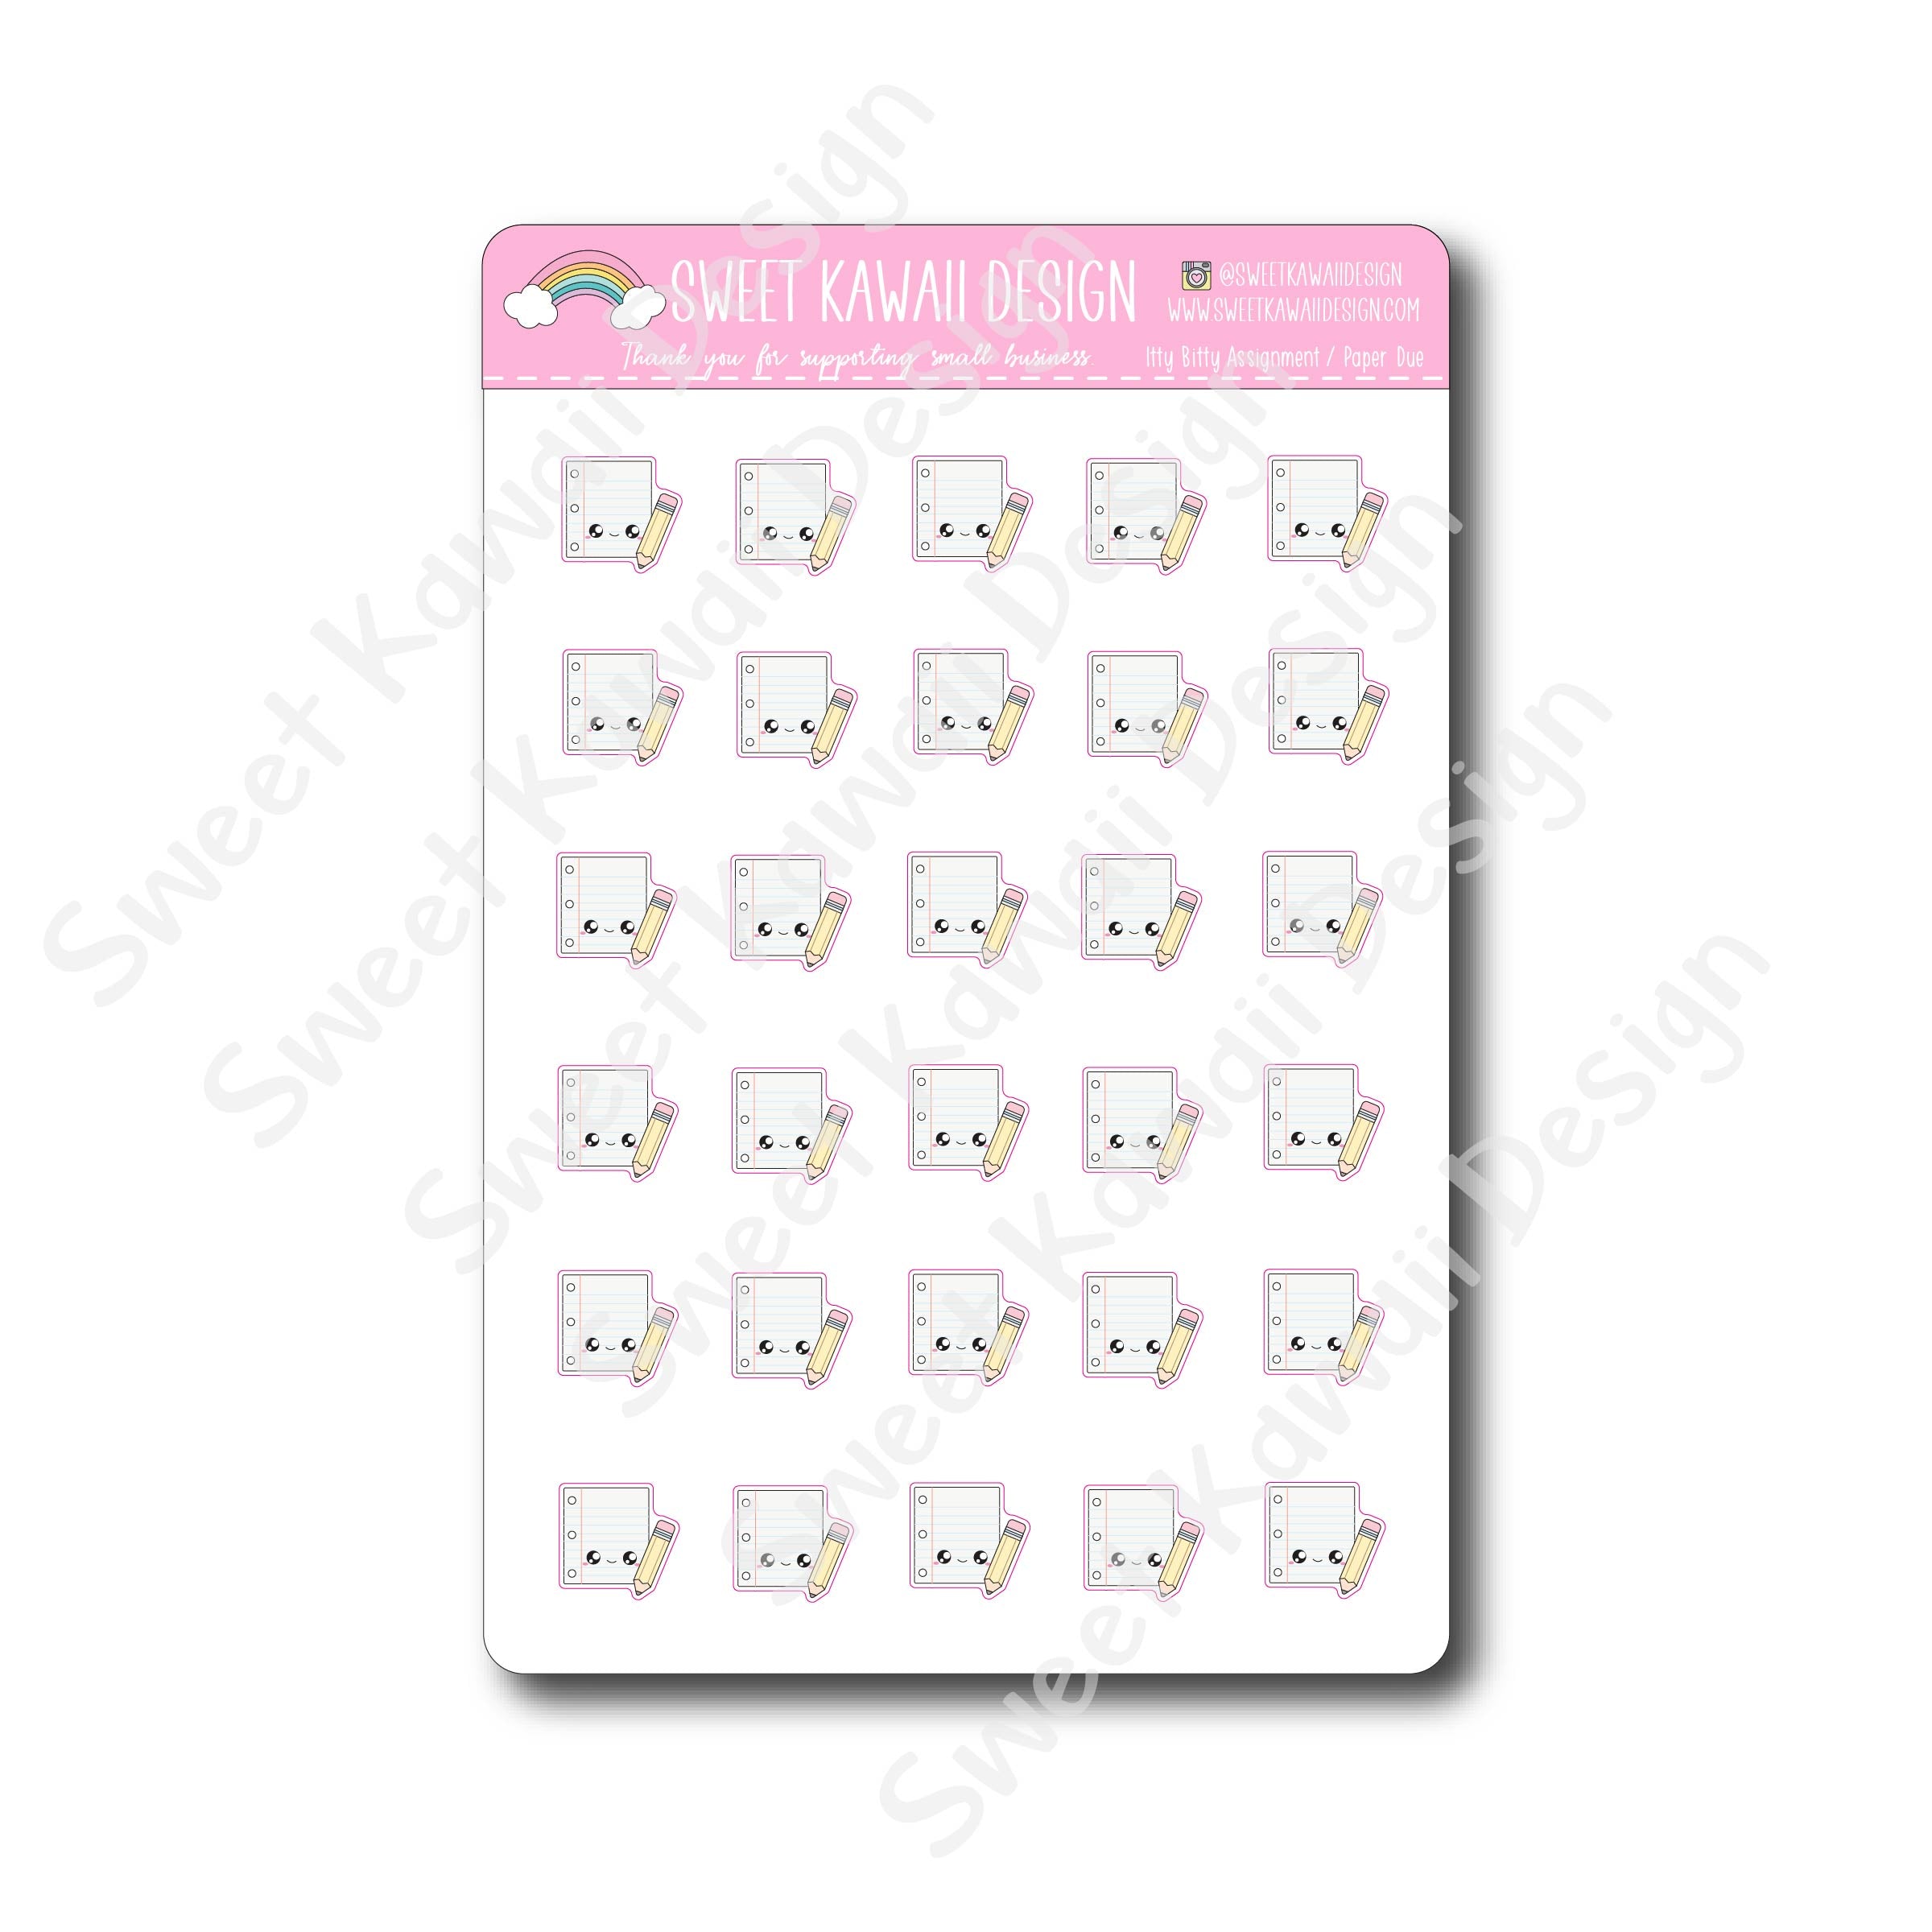 Kawaii Assignment/Paper Due Stickers (paper/pencil)